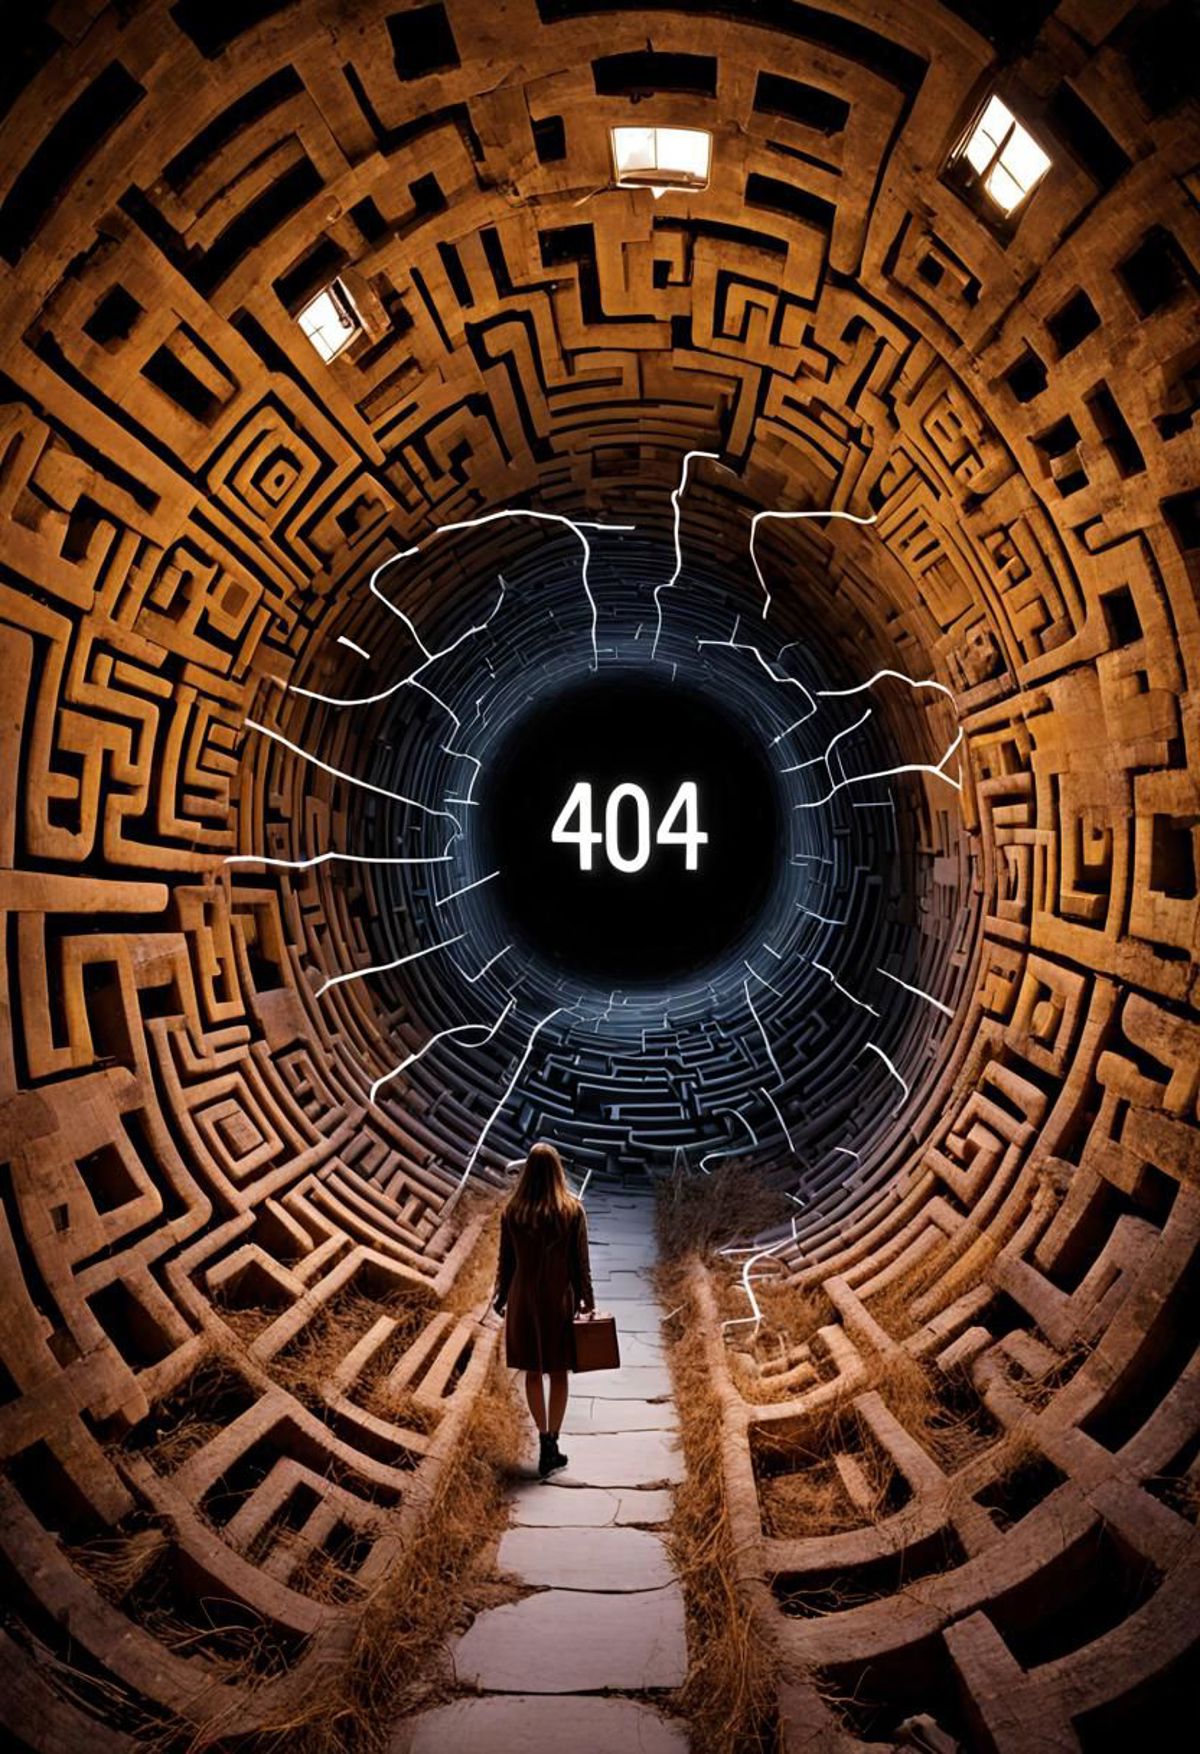 A woman is walking through a maze-like structure with the number 404 on the wall.